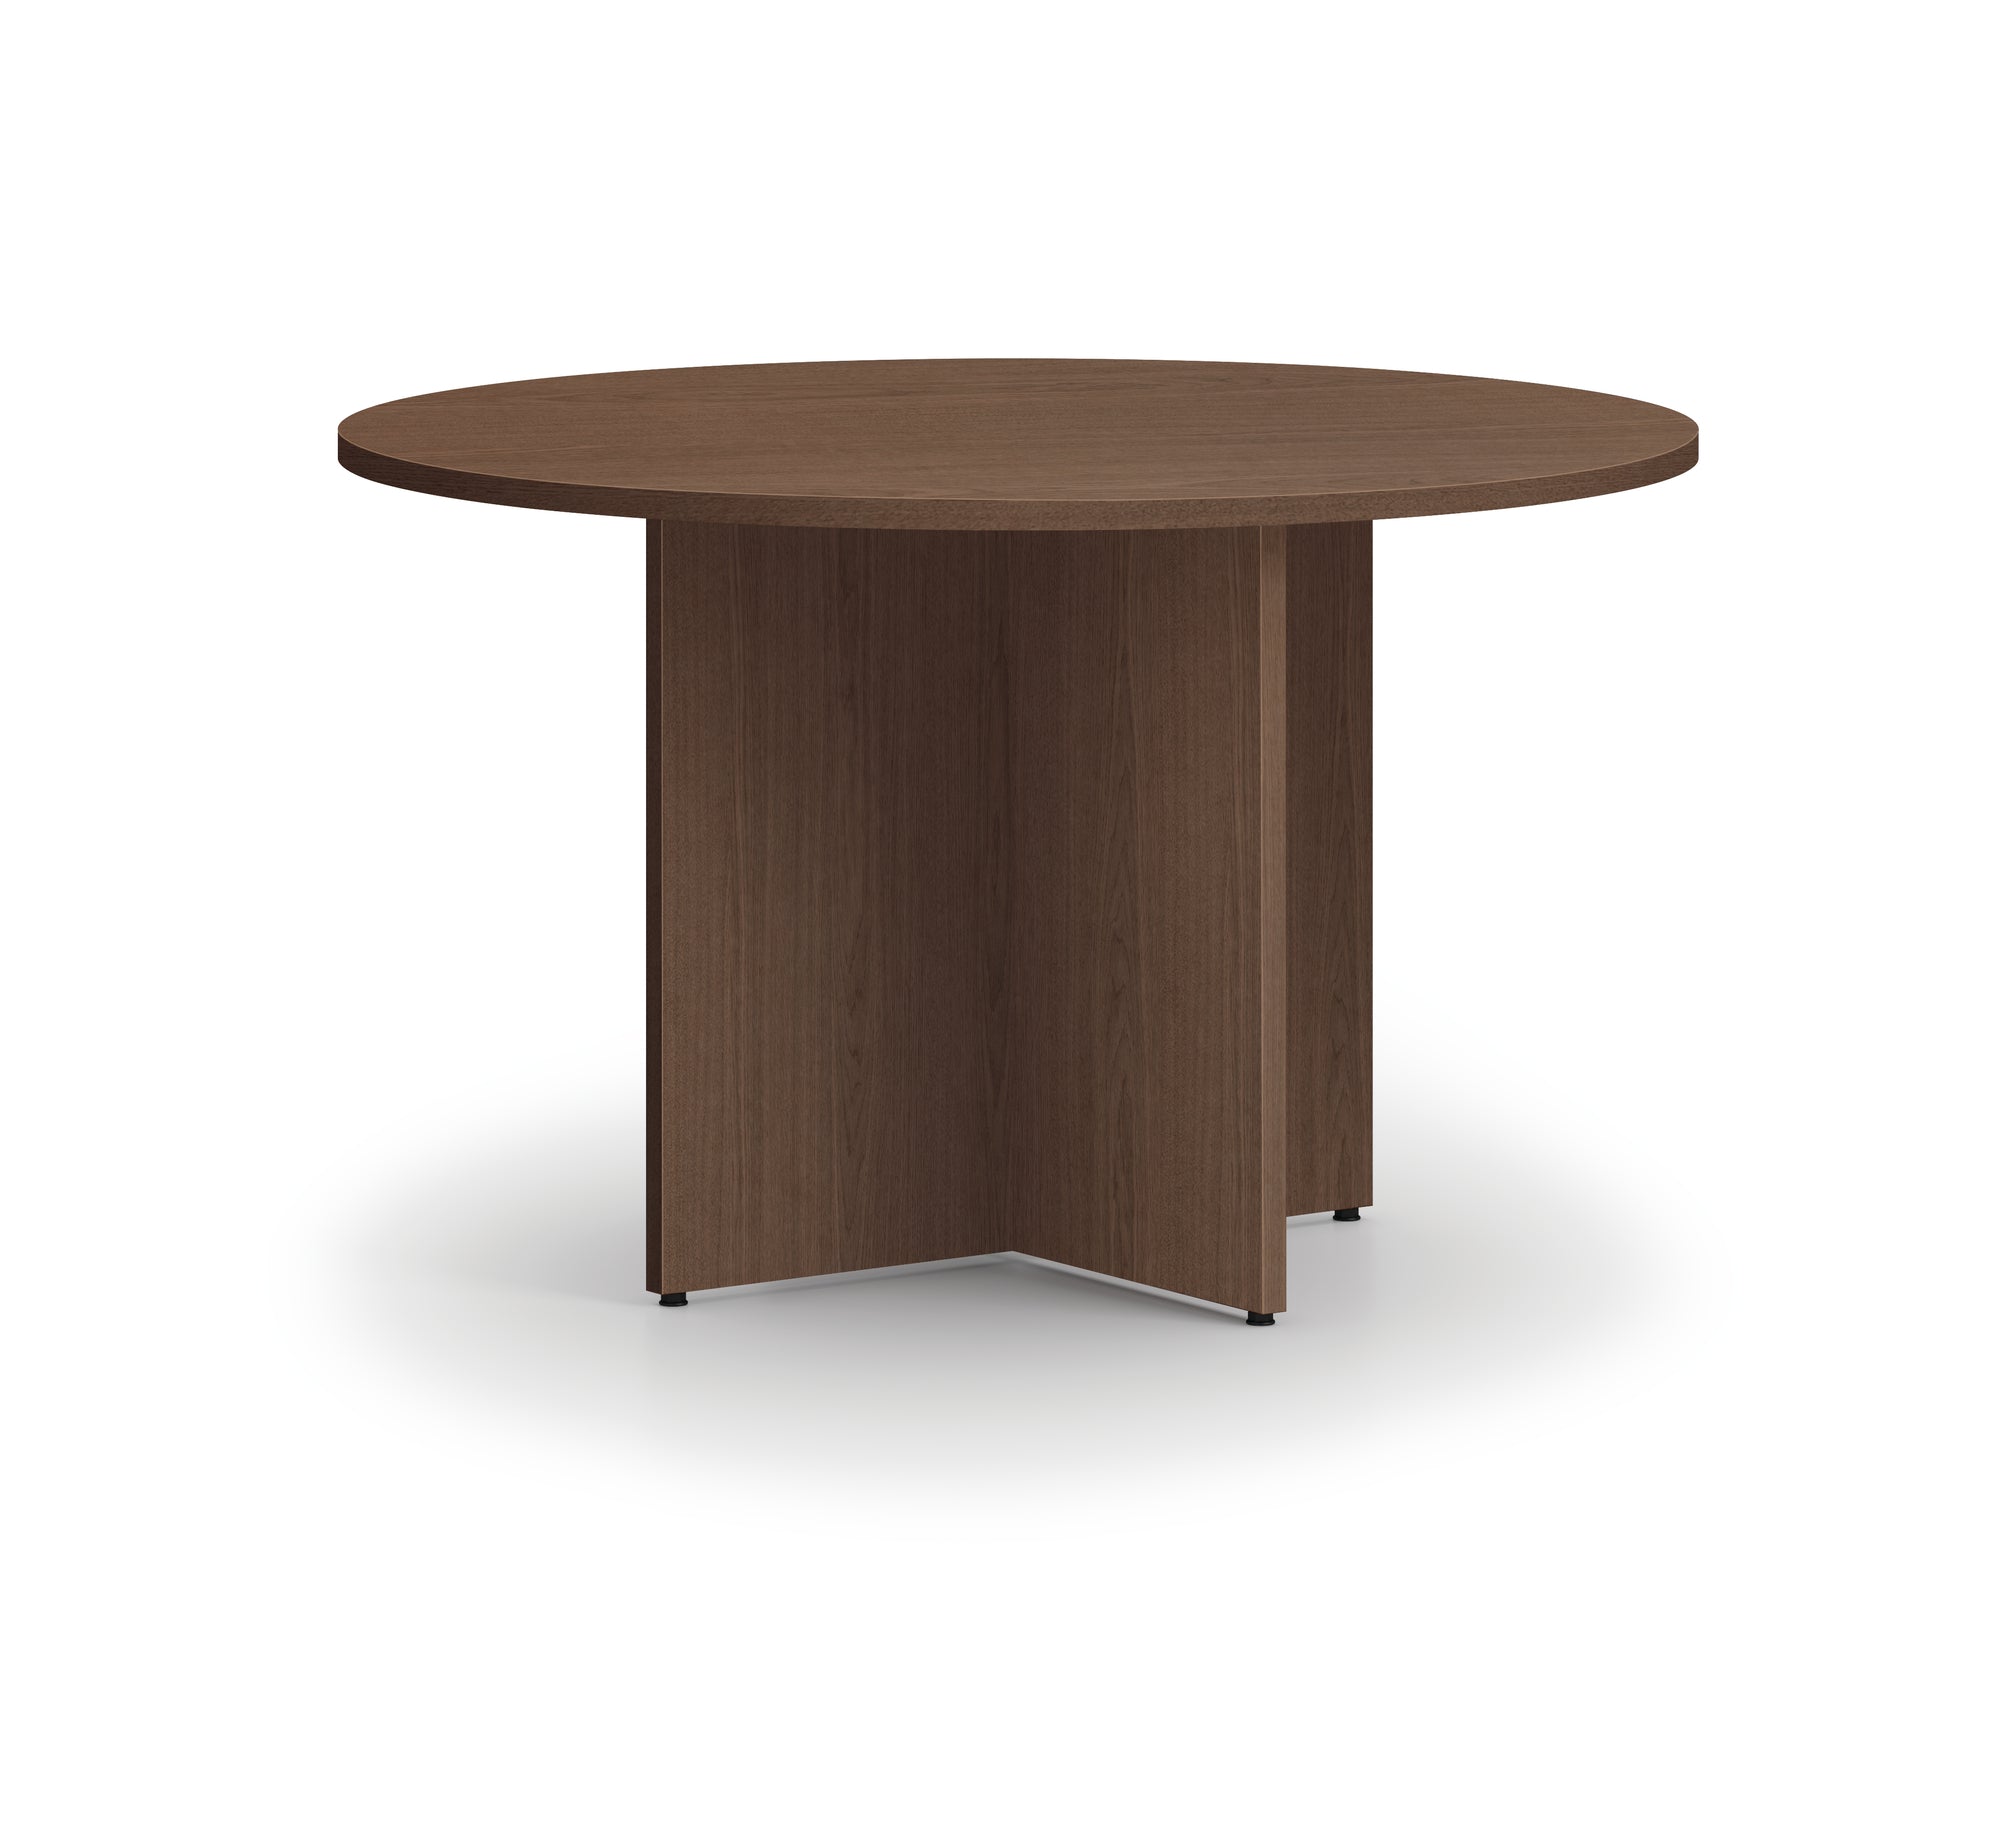 14 HON MOD Round Conference Tables